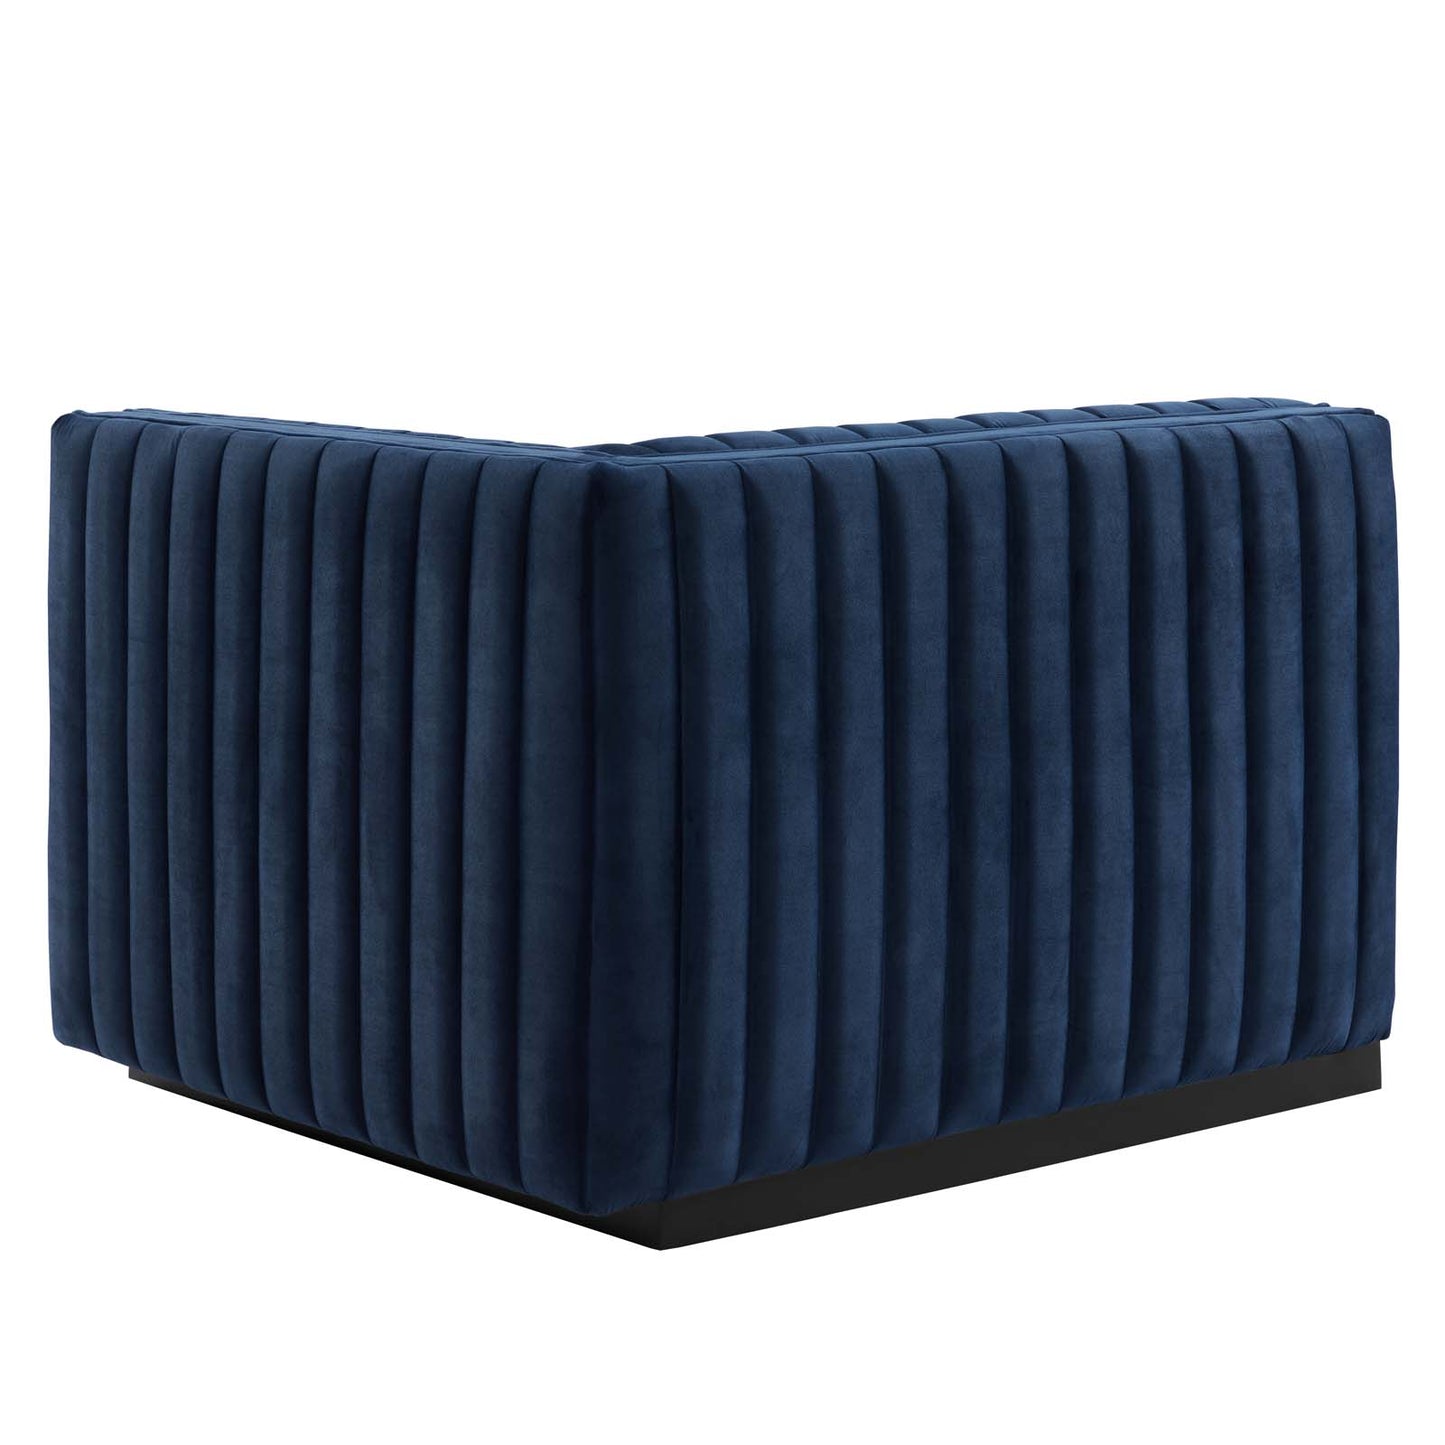 Conjure Channel Tufted Performance Velvet Right-Arm Chair Black Midnight Blue EEI-5492-BLK-MID